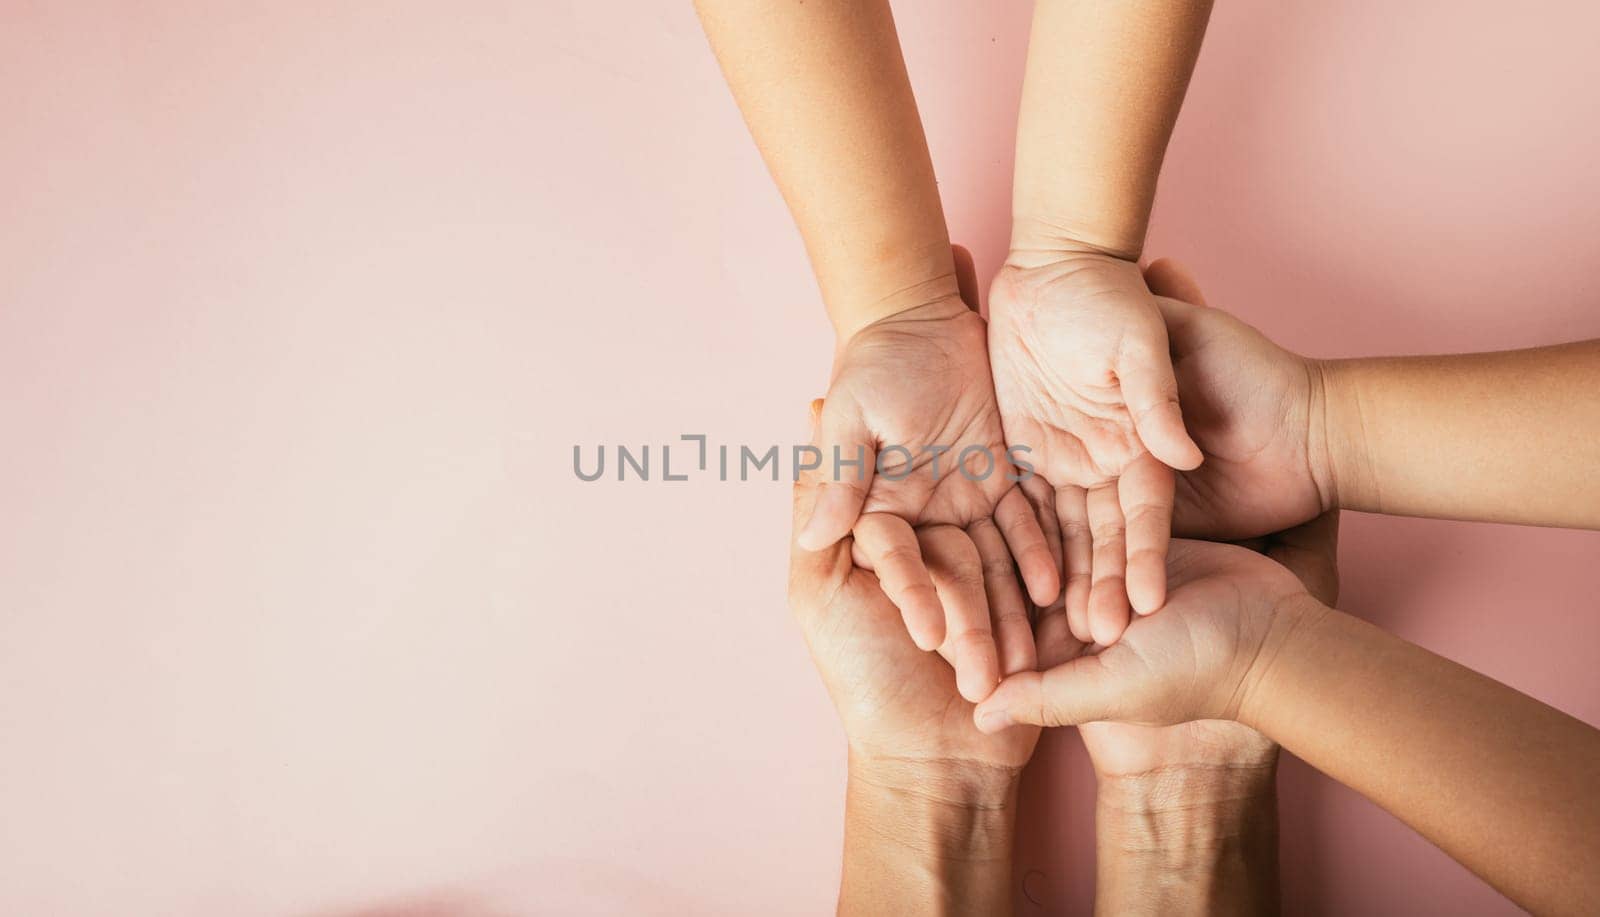 Celebrating family day, Parents and kid holding empty hands together isolated on a color background. Space for text. by Sorapop